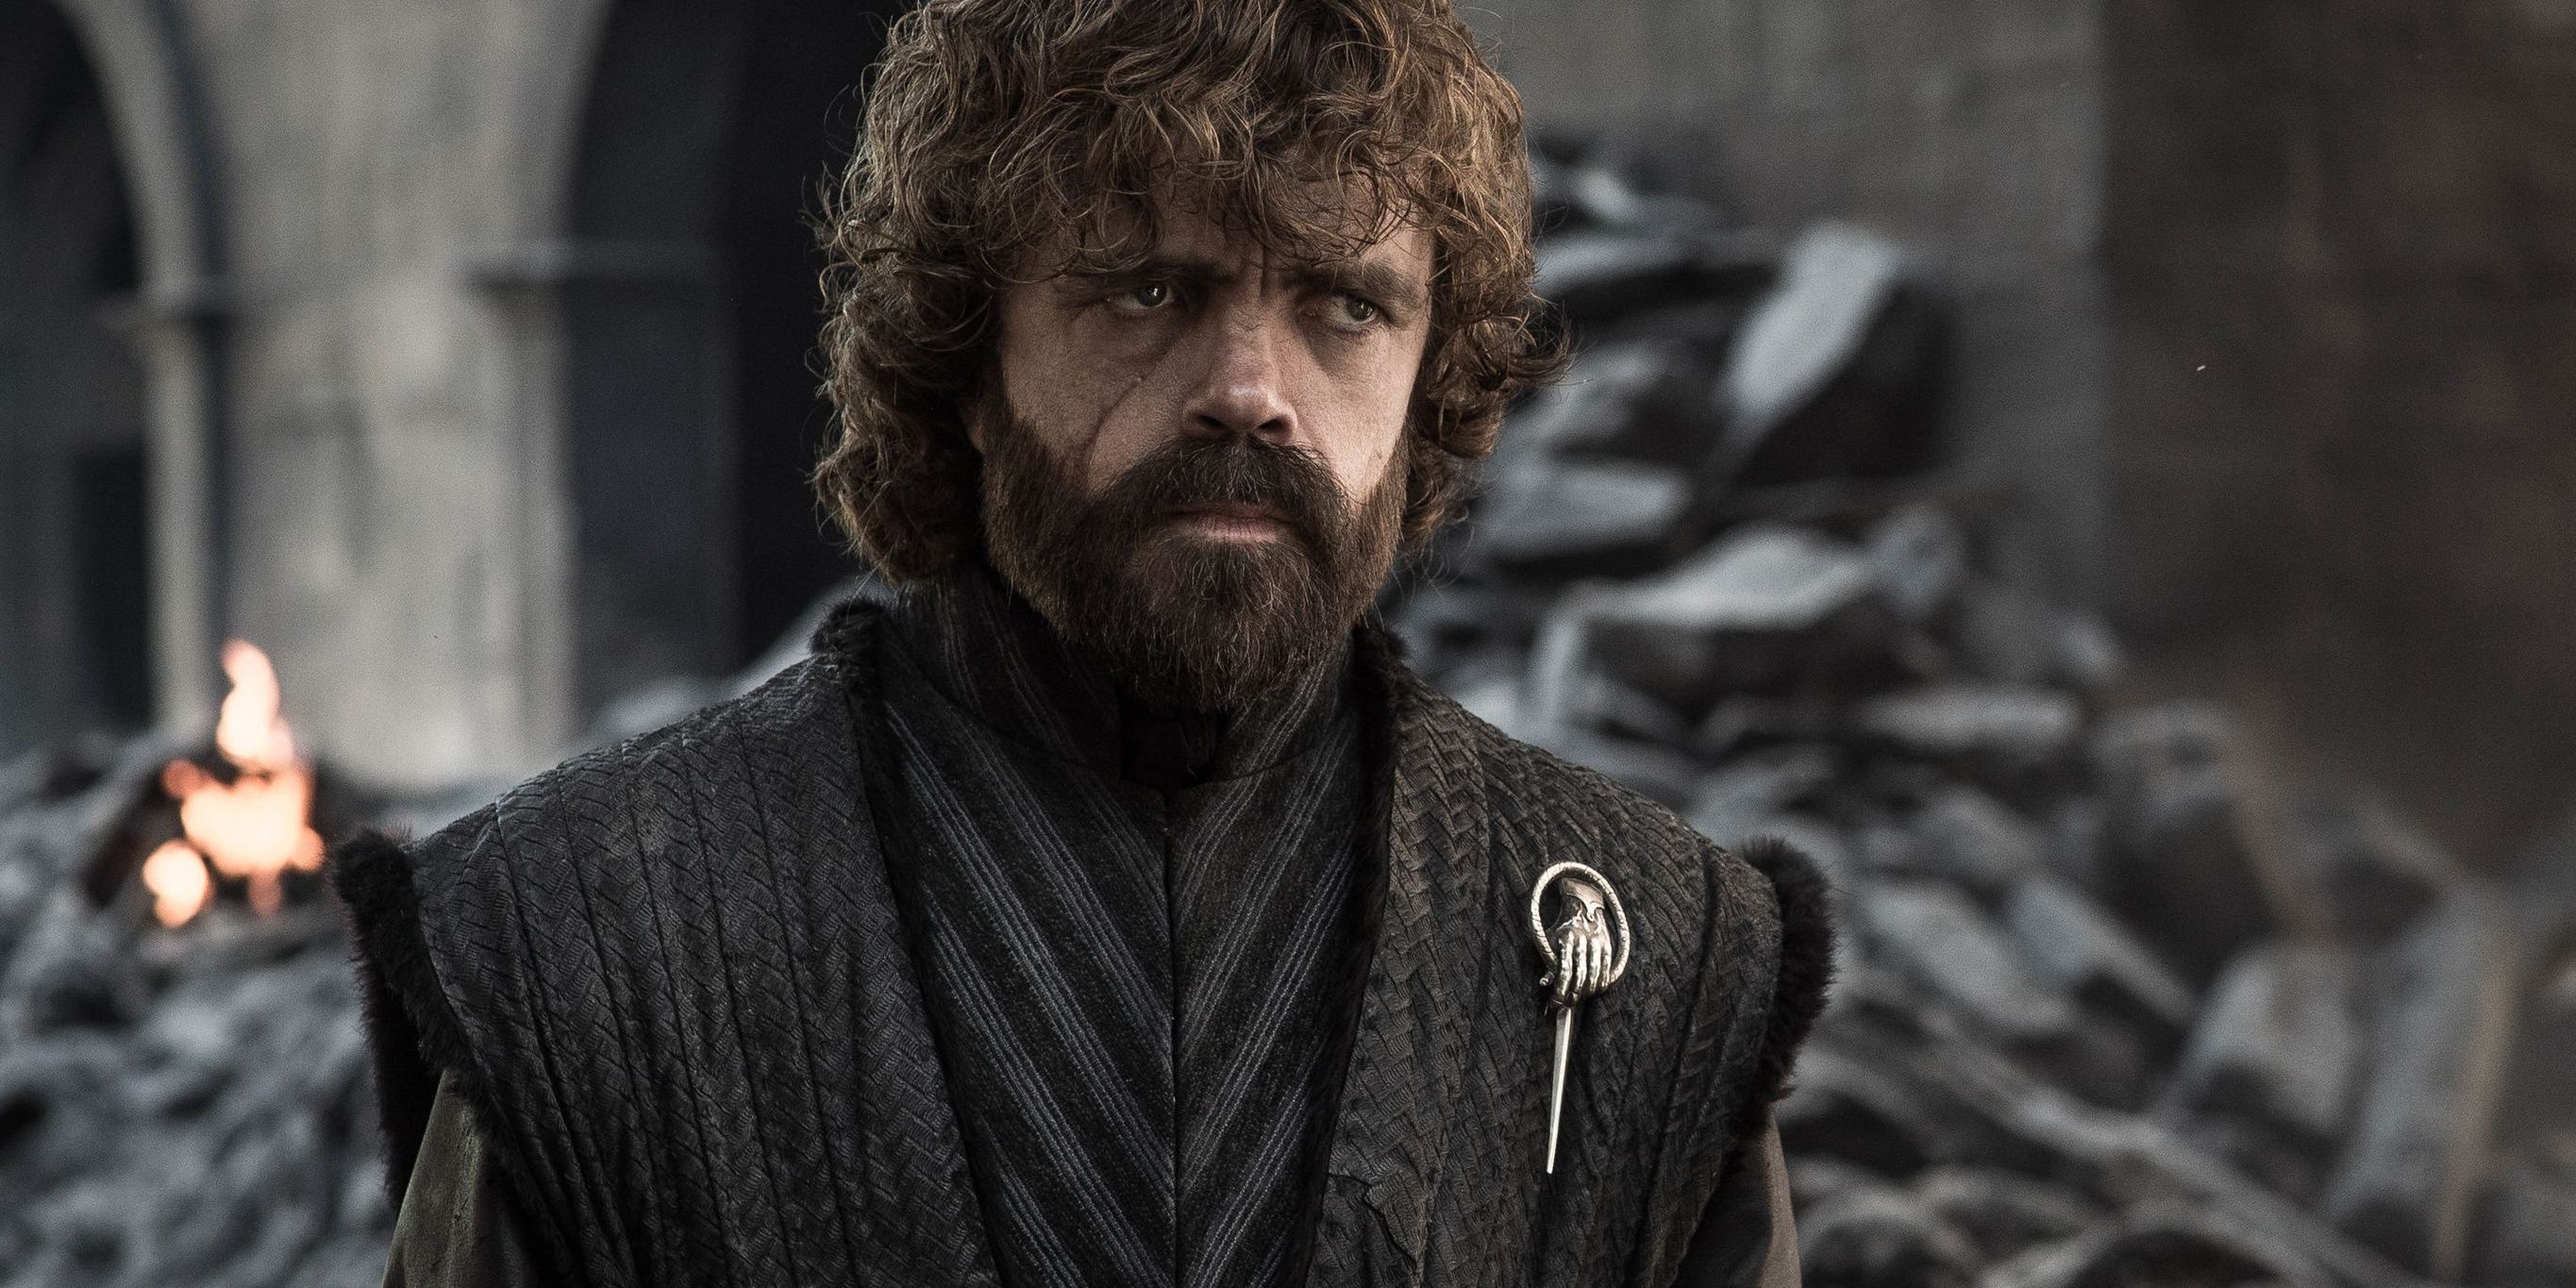 pETER dINKLAGE AS TYRION LANNISTER